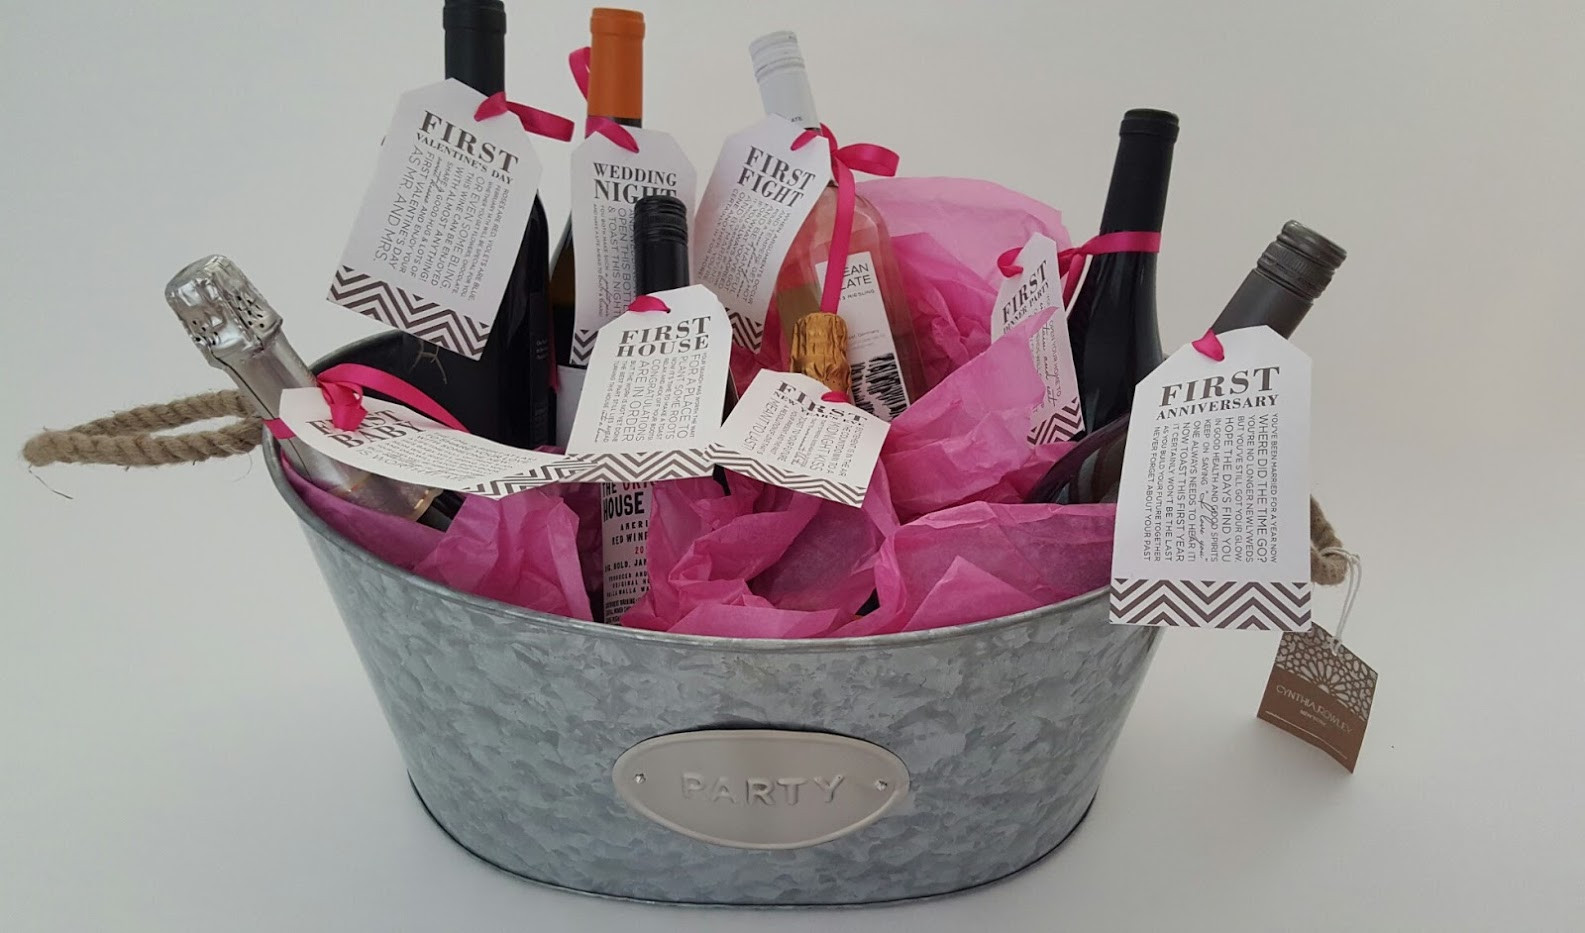 Bride Gift Basket Ideas
 Bridal Shower Gift DIY to Try A Basket of “Firsts” for